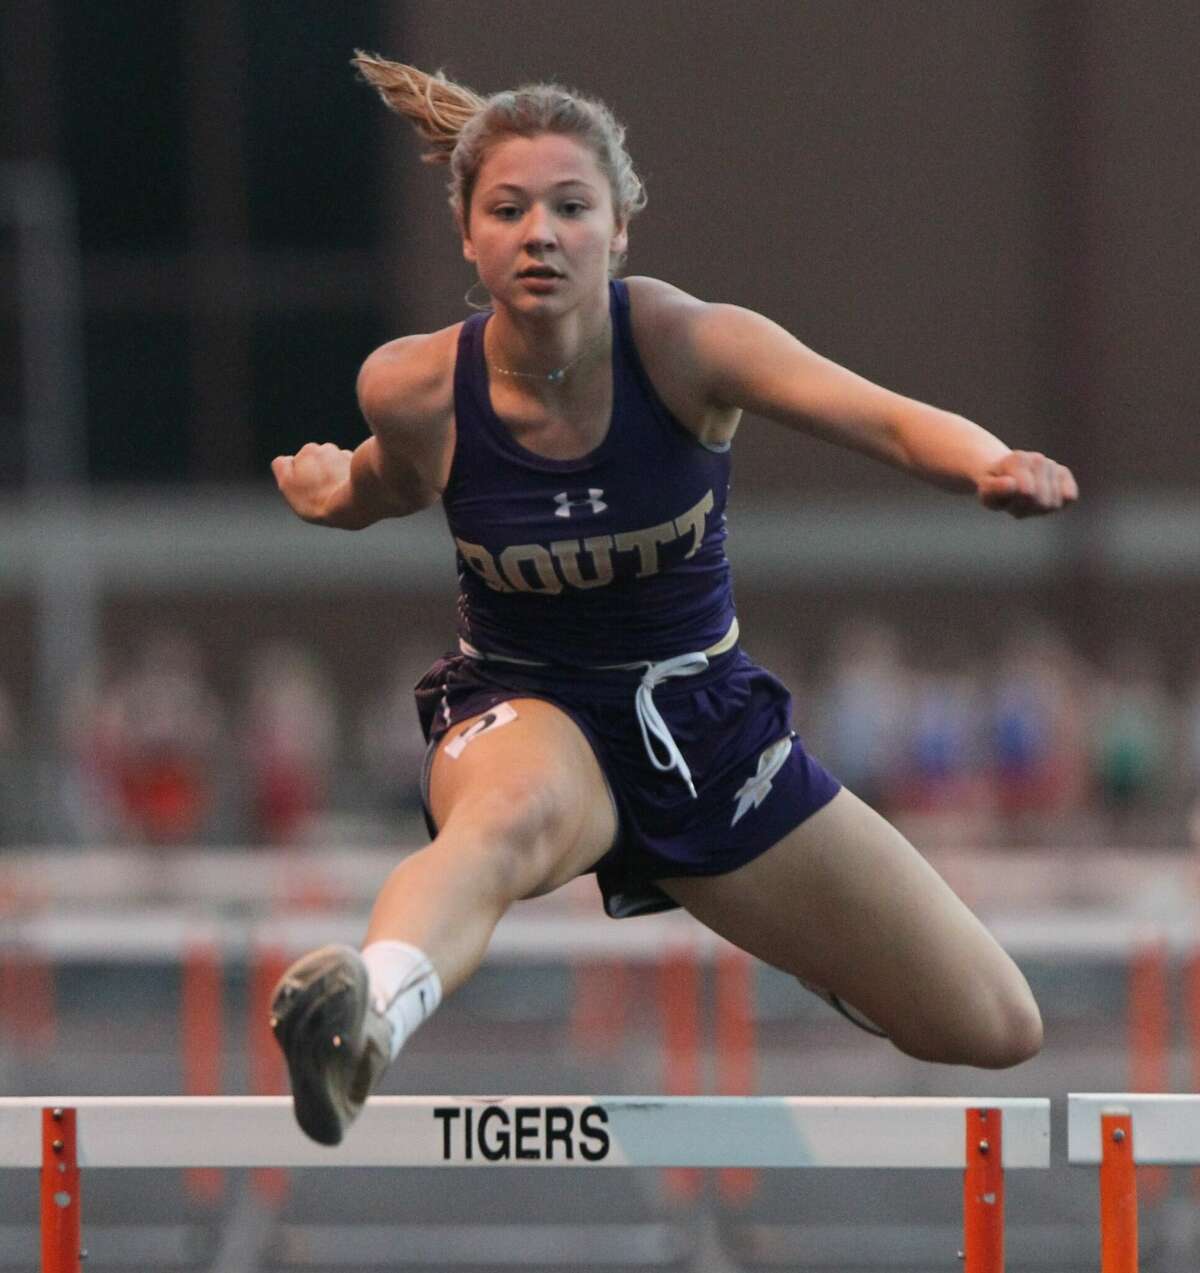 West Central's Emma Terwische clears the last hurdle in the 300-meter hurdles at the Beardstown Sectional Friday night. Terwische finished second to qualify for state in the event for the second straight year.